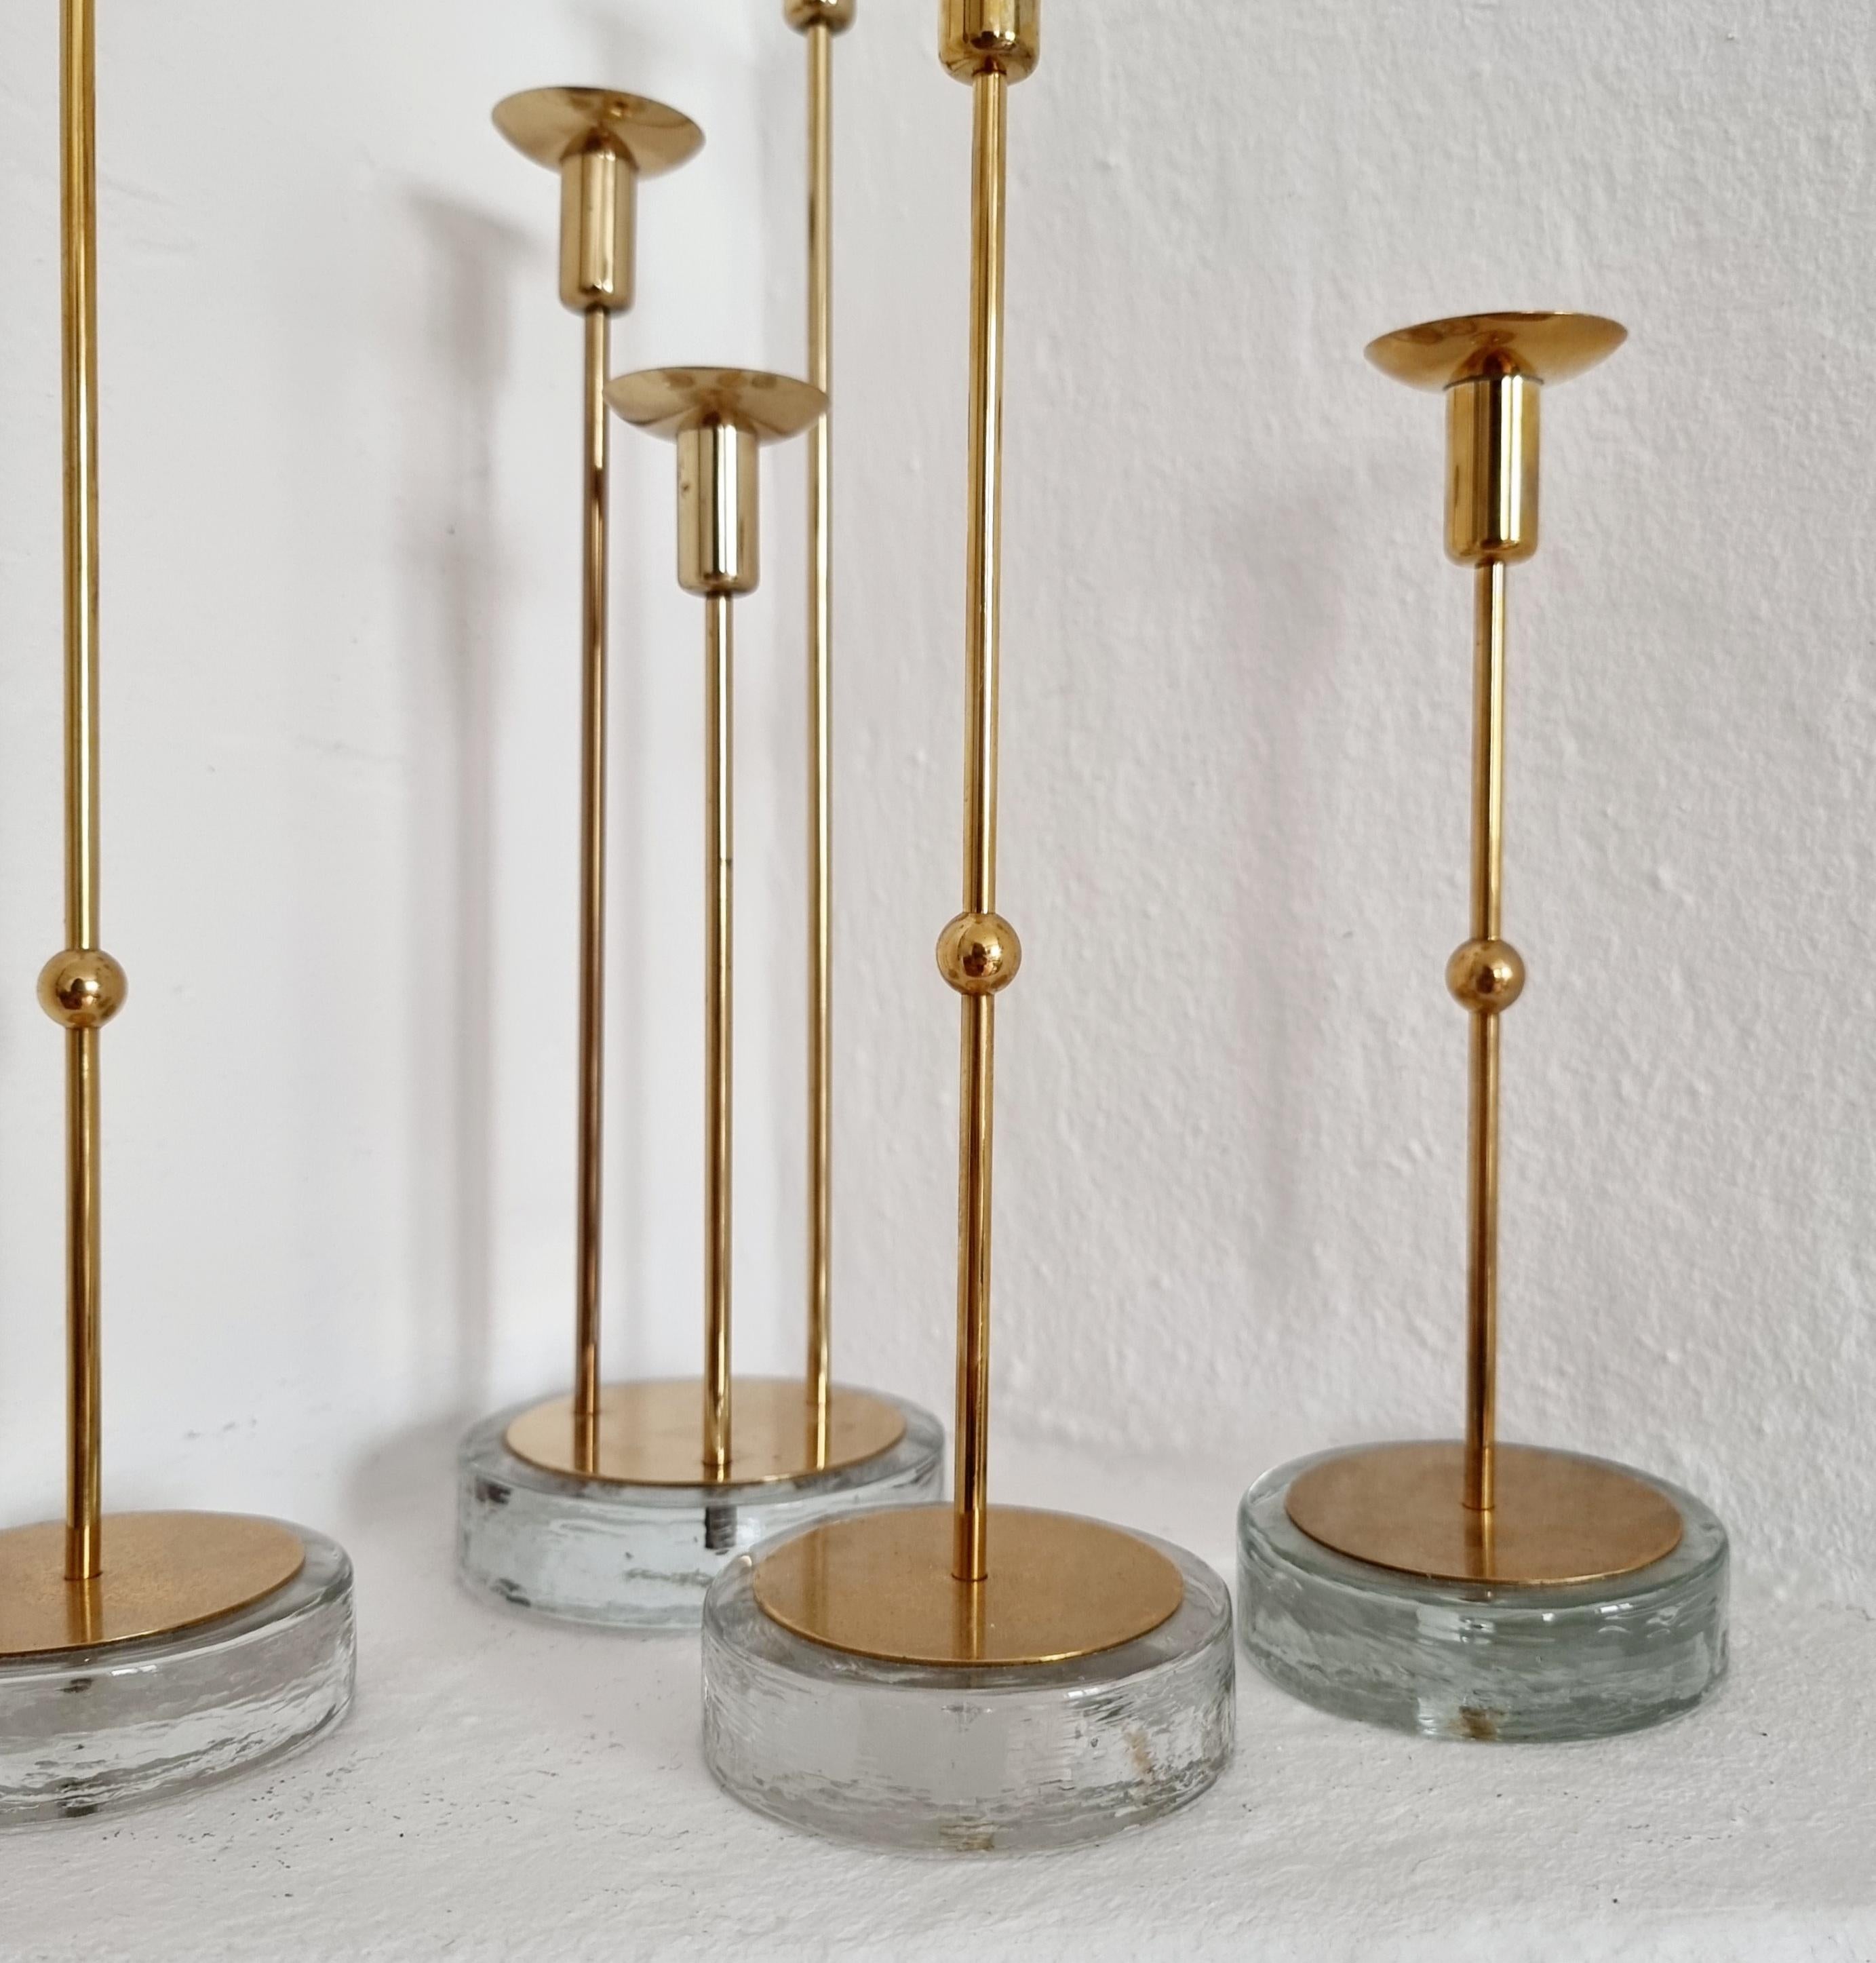 Mid-20th Century Gunnar Ander, Four Candle Holders, Brass & Glass, Ystad Metall, Swedish Modern For Sale